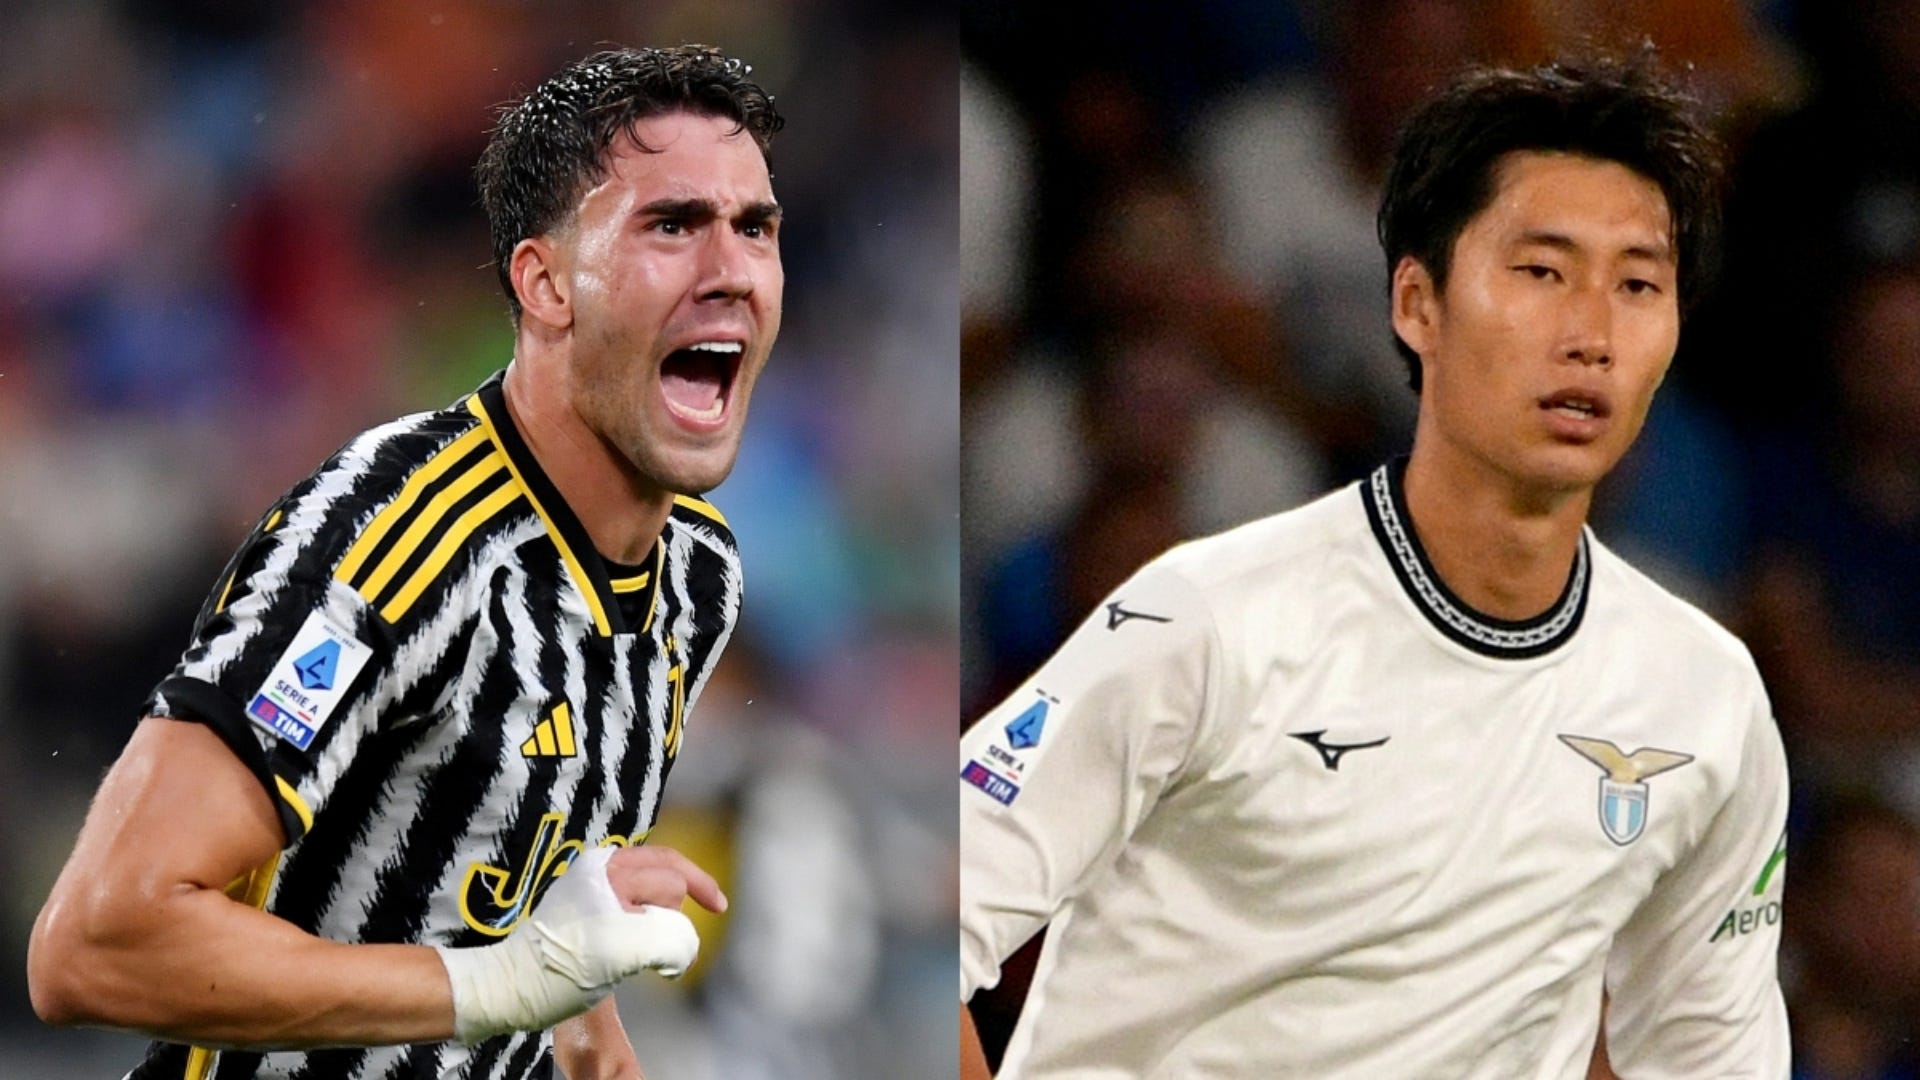 Juventus vs Lazio Live stream, TV channel, kick-off time and where to watch Goal US